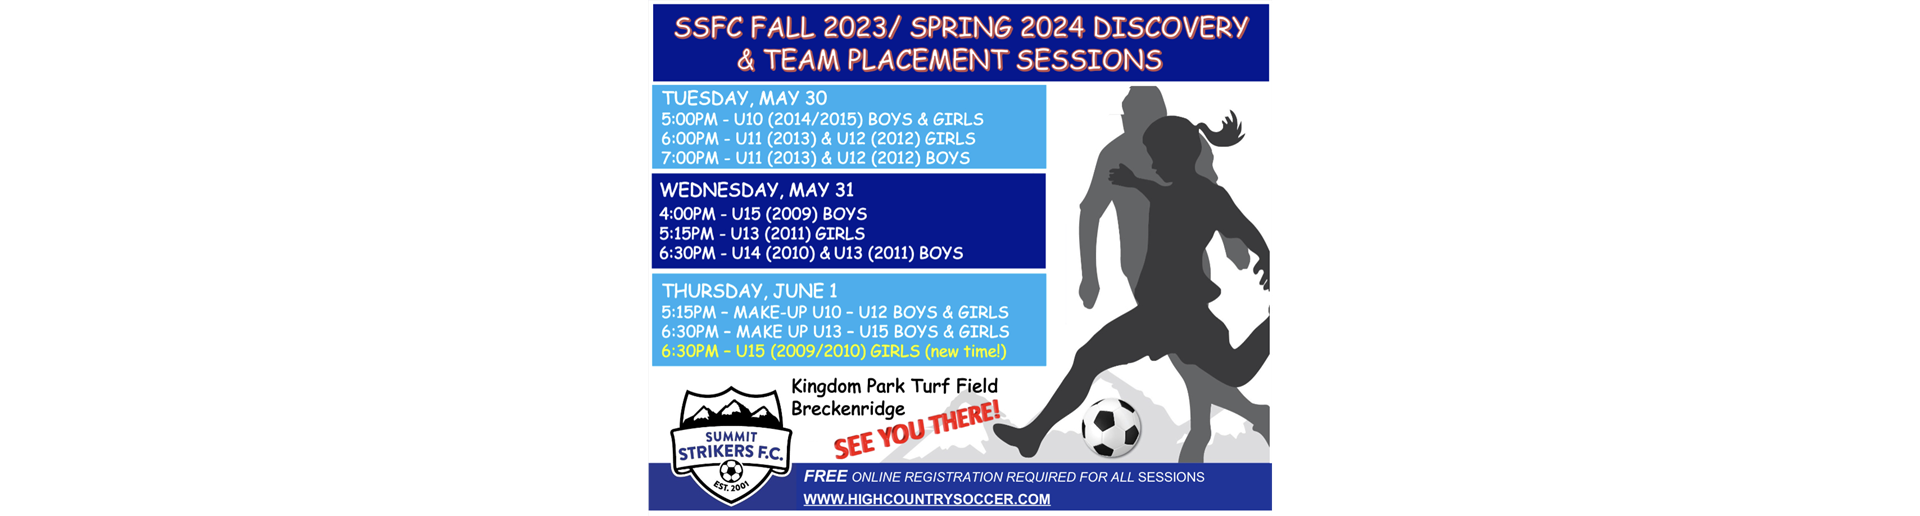 2023/24 SSFC Discovery Sessions!